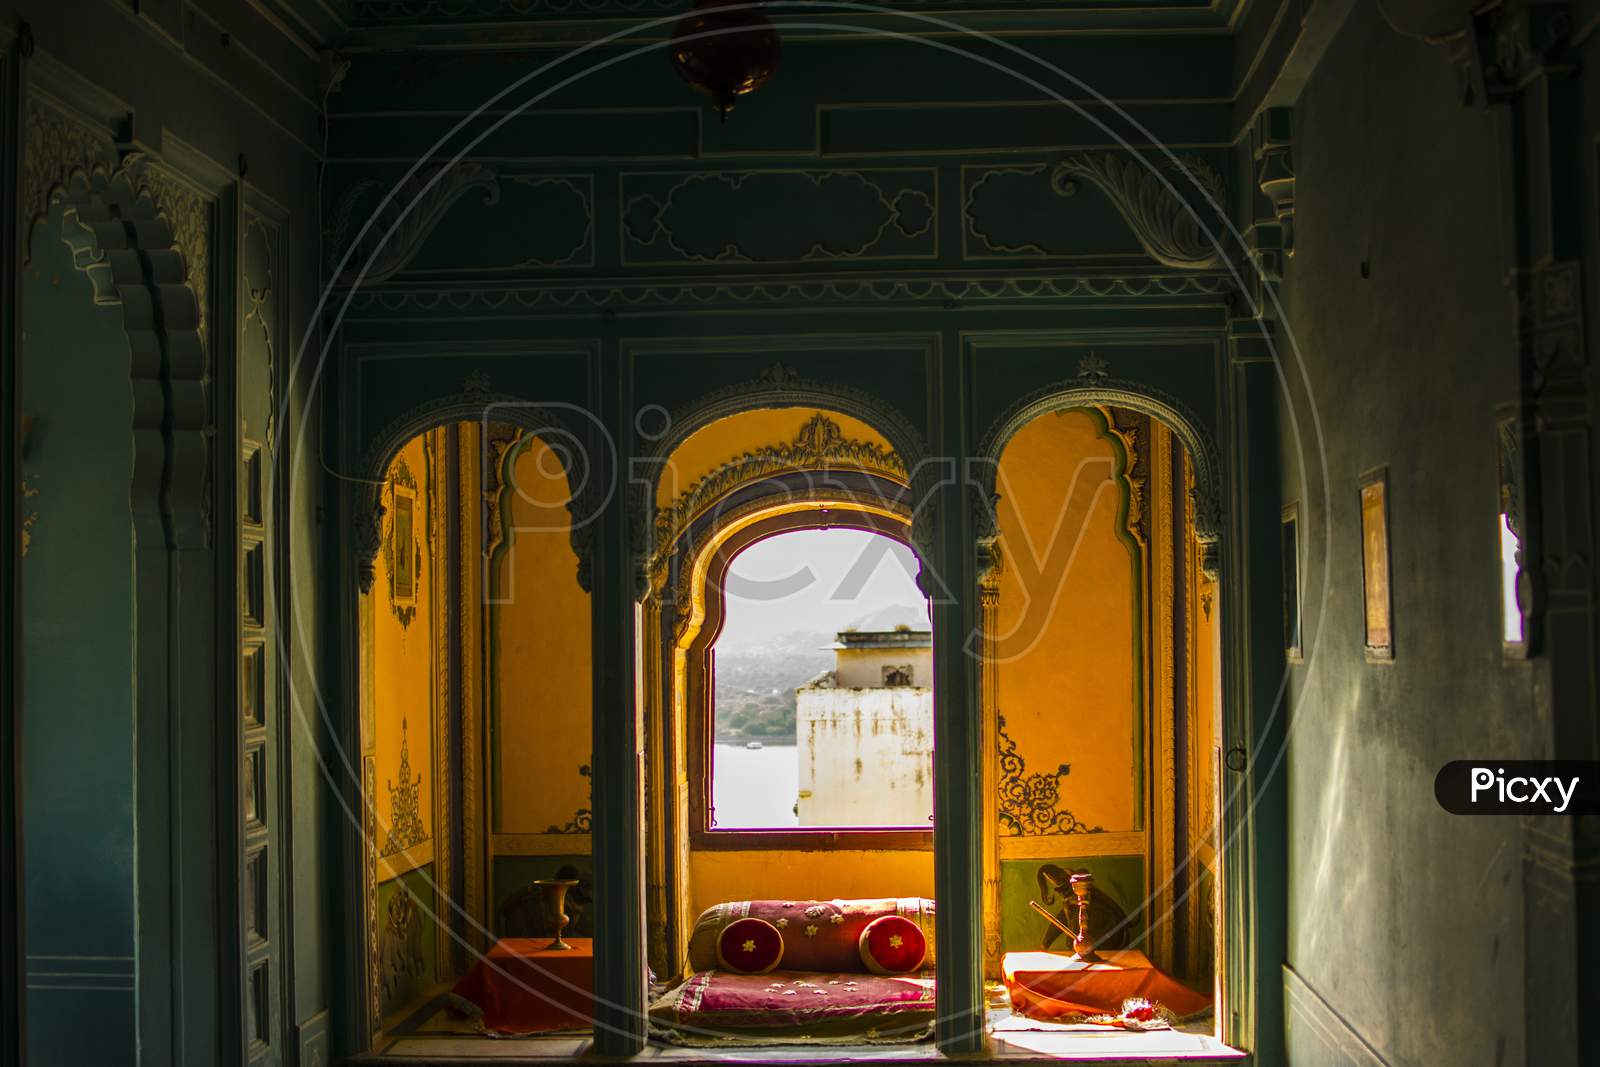 The Beautiful Architecture Of Udaipur City Palace